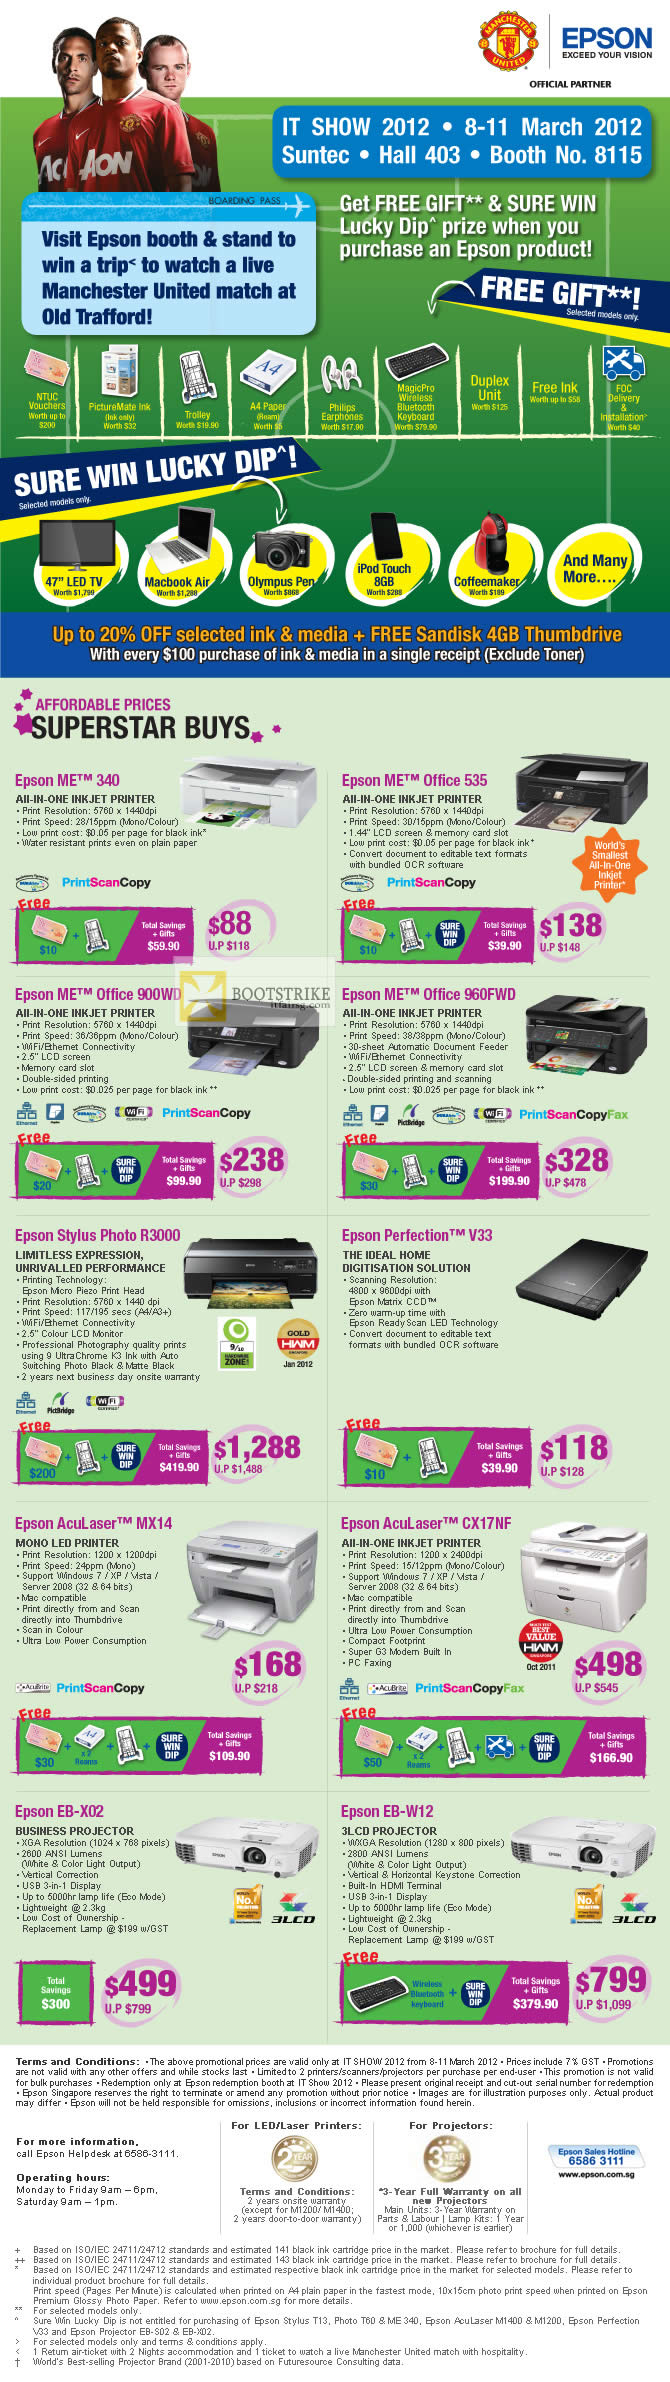 IT SHOW 2012 price list image brochure of Epson Printers Inkjet ME 340, ME Office 535, 900WD, 960FWD, Stylus Photo R3000, Perfection V33, AcuLaser MX14, CX17NF, Projector EB-X02, EB-W12